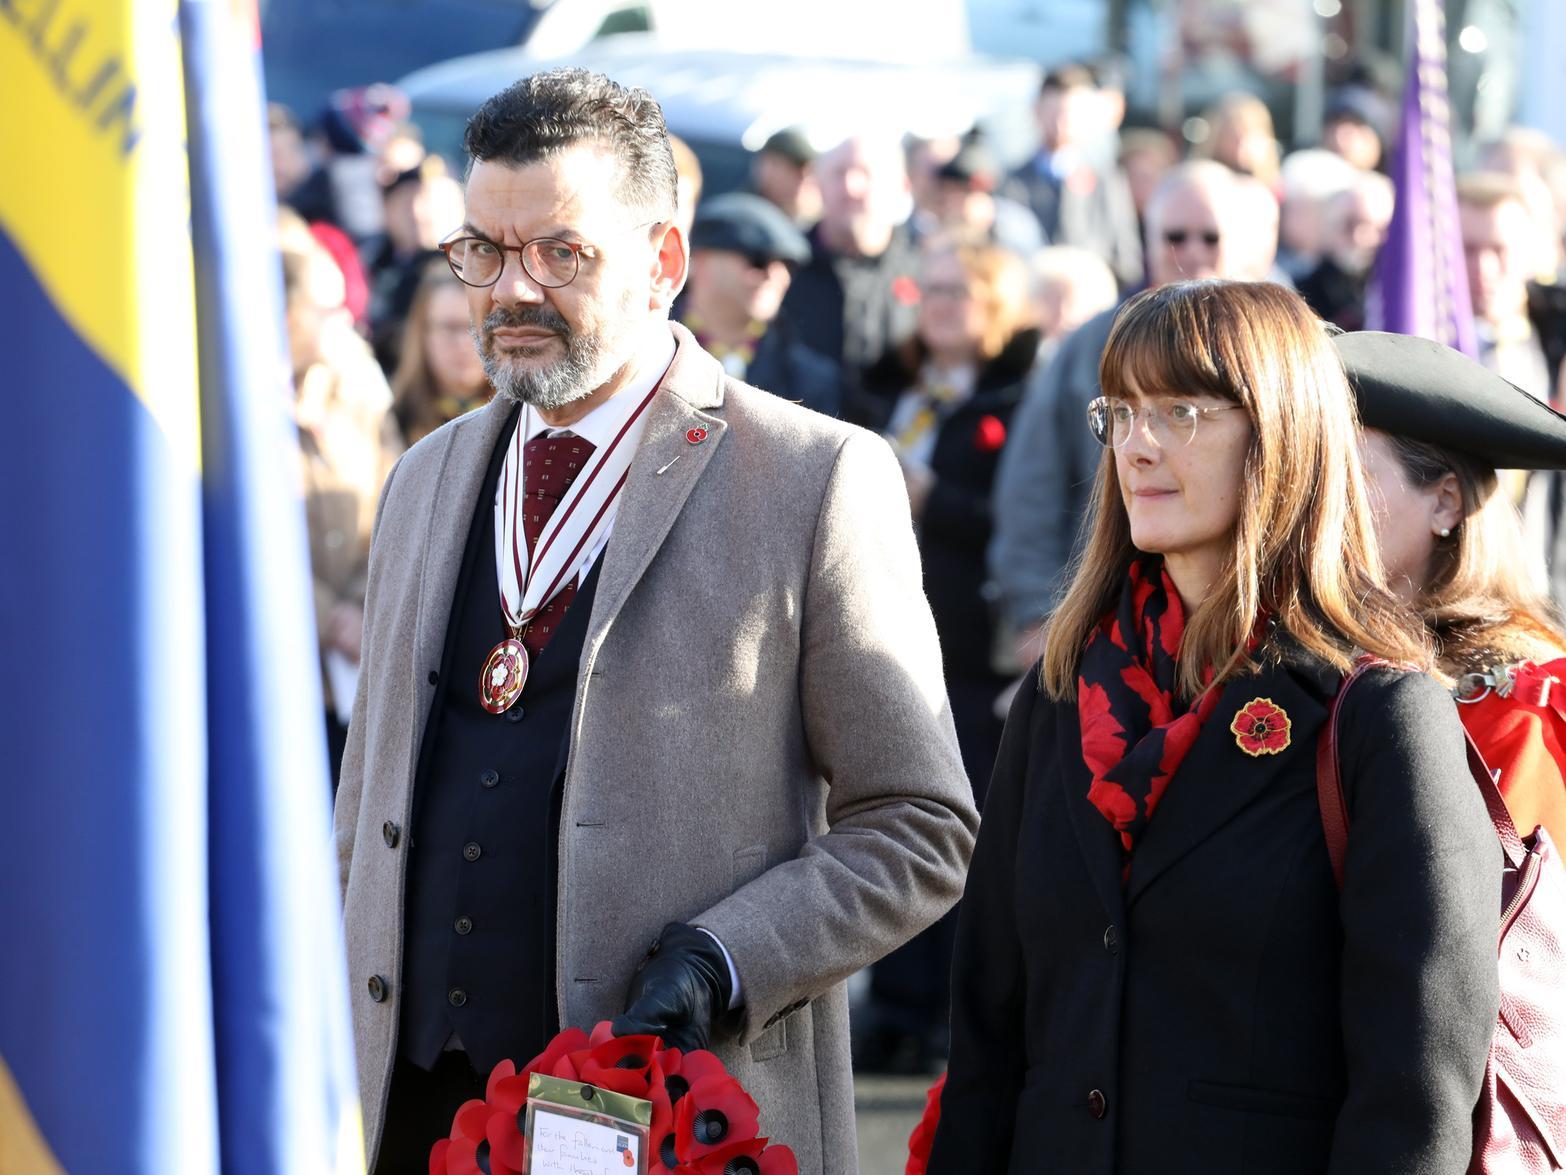 Dignitaries gathered to lay wreaths at the war memorial in Broad Green